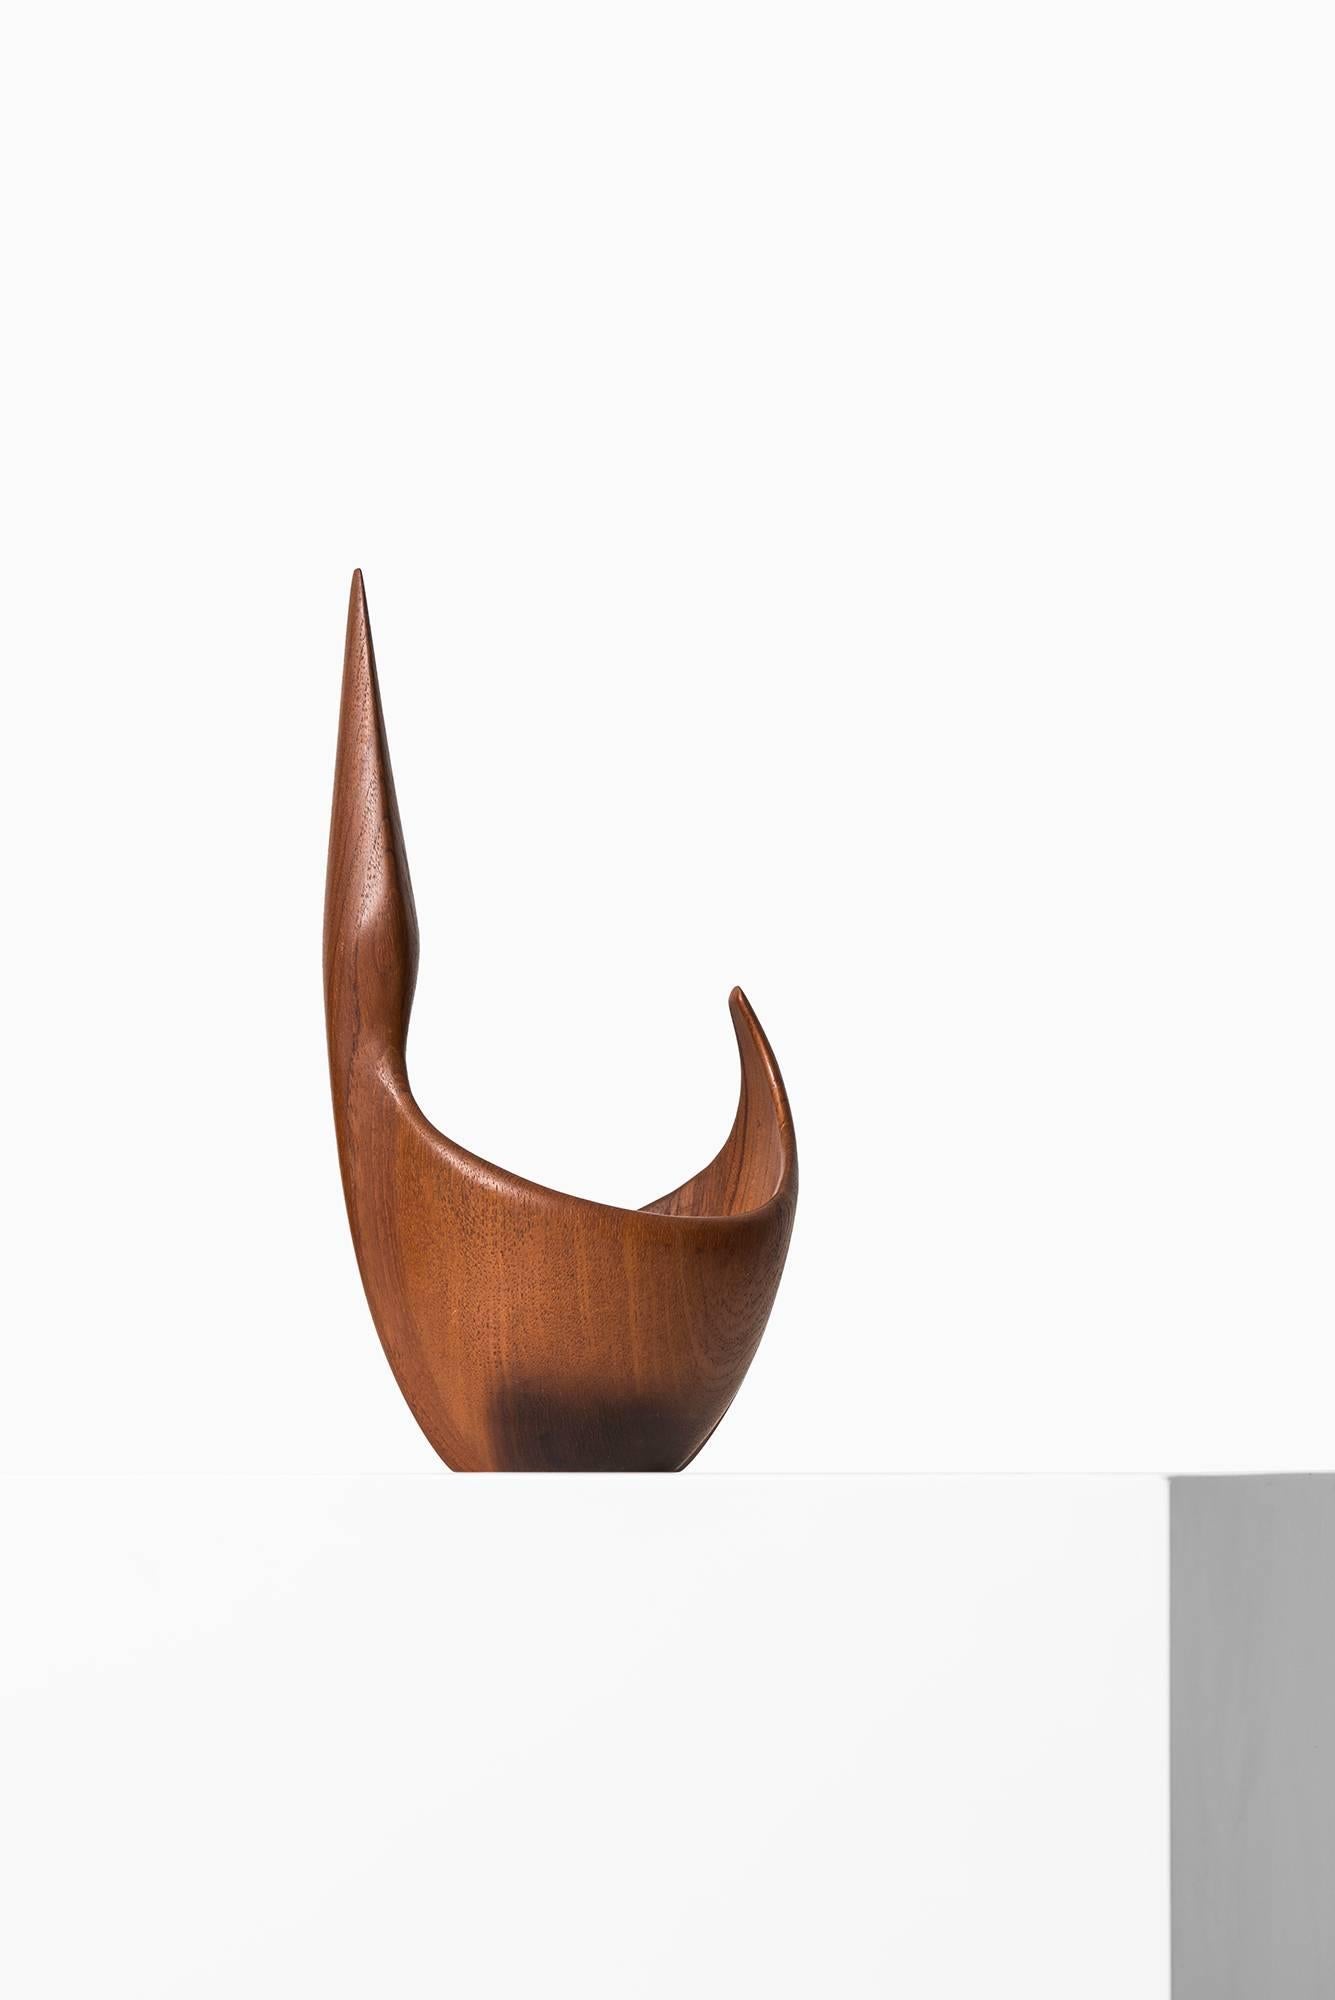 Sculpture/bowl designed by Johnny Mattsson. Produced by Johnny Mattsson in Sweden.